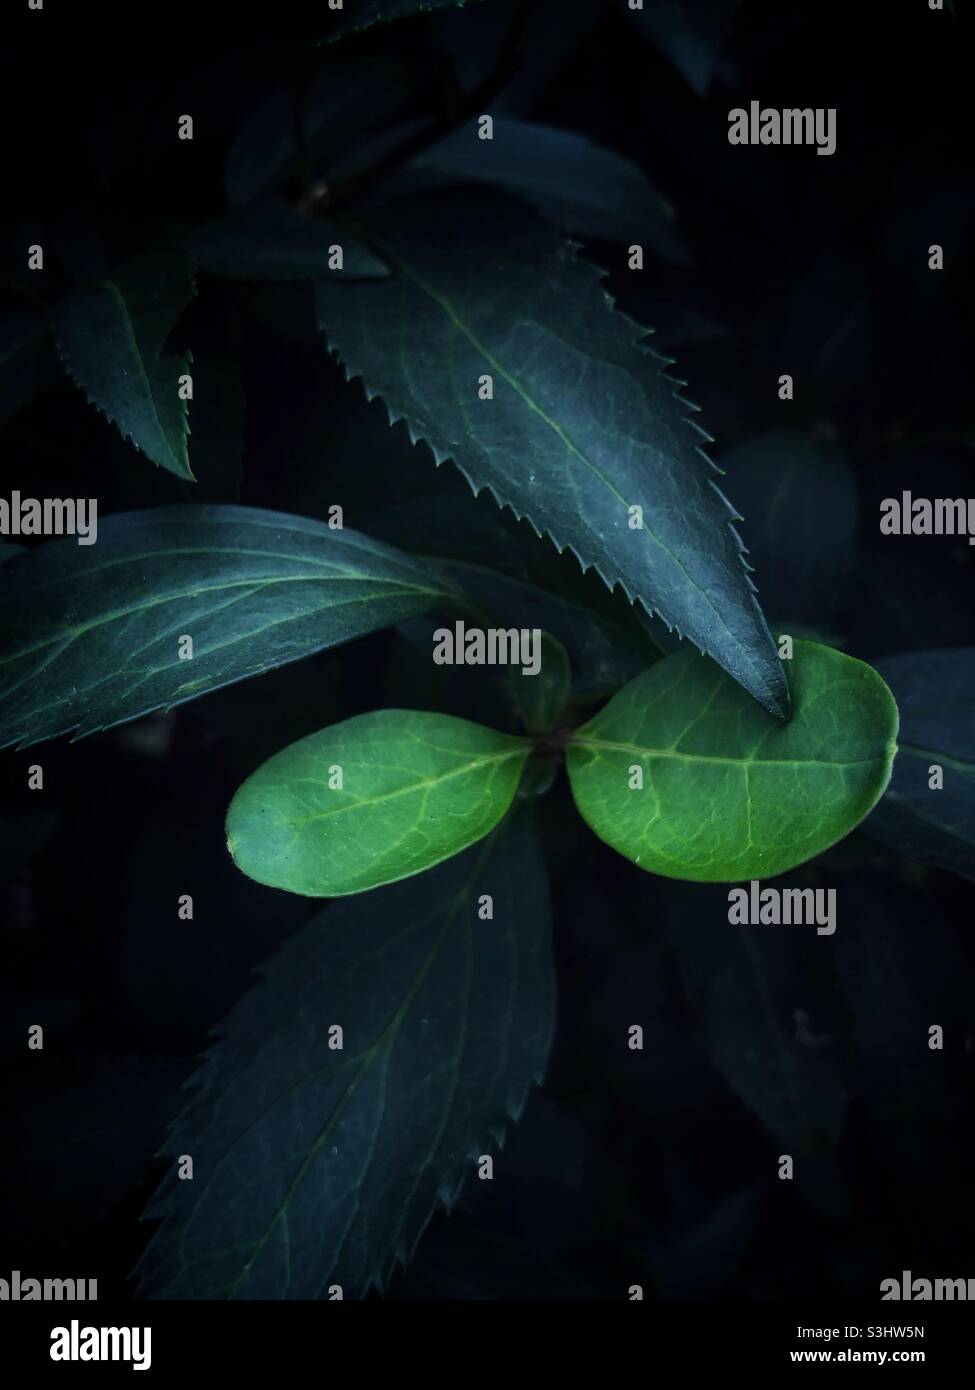 Lush green leaves of a tropical rainforest plant at night Stock Photo